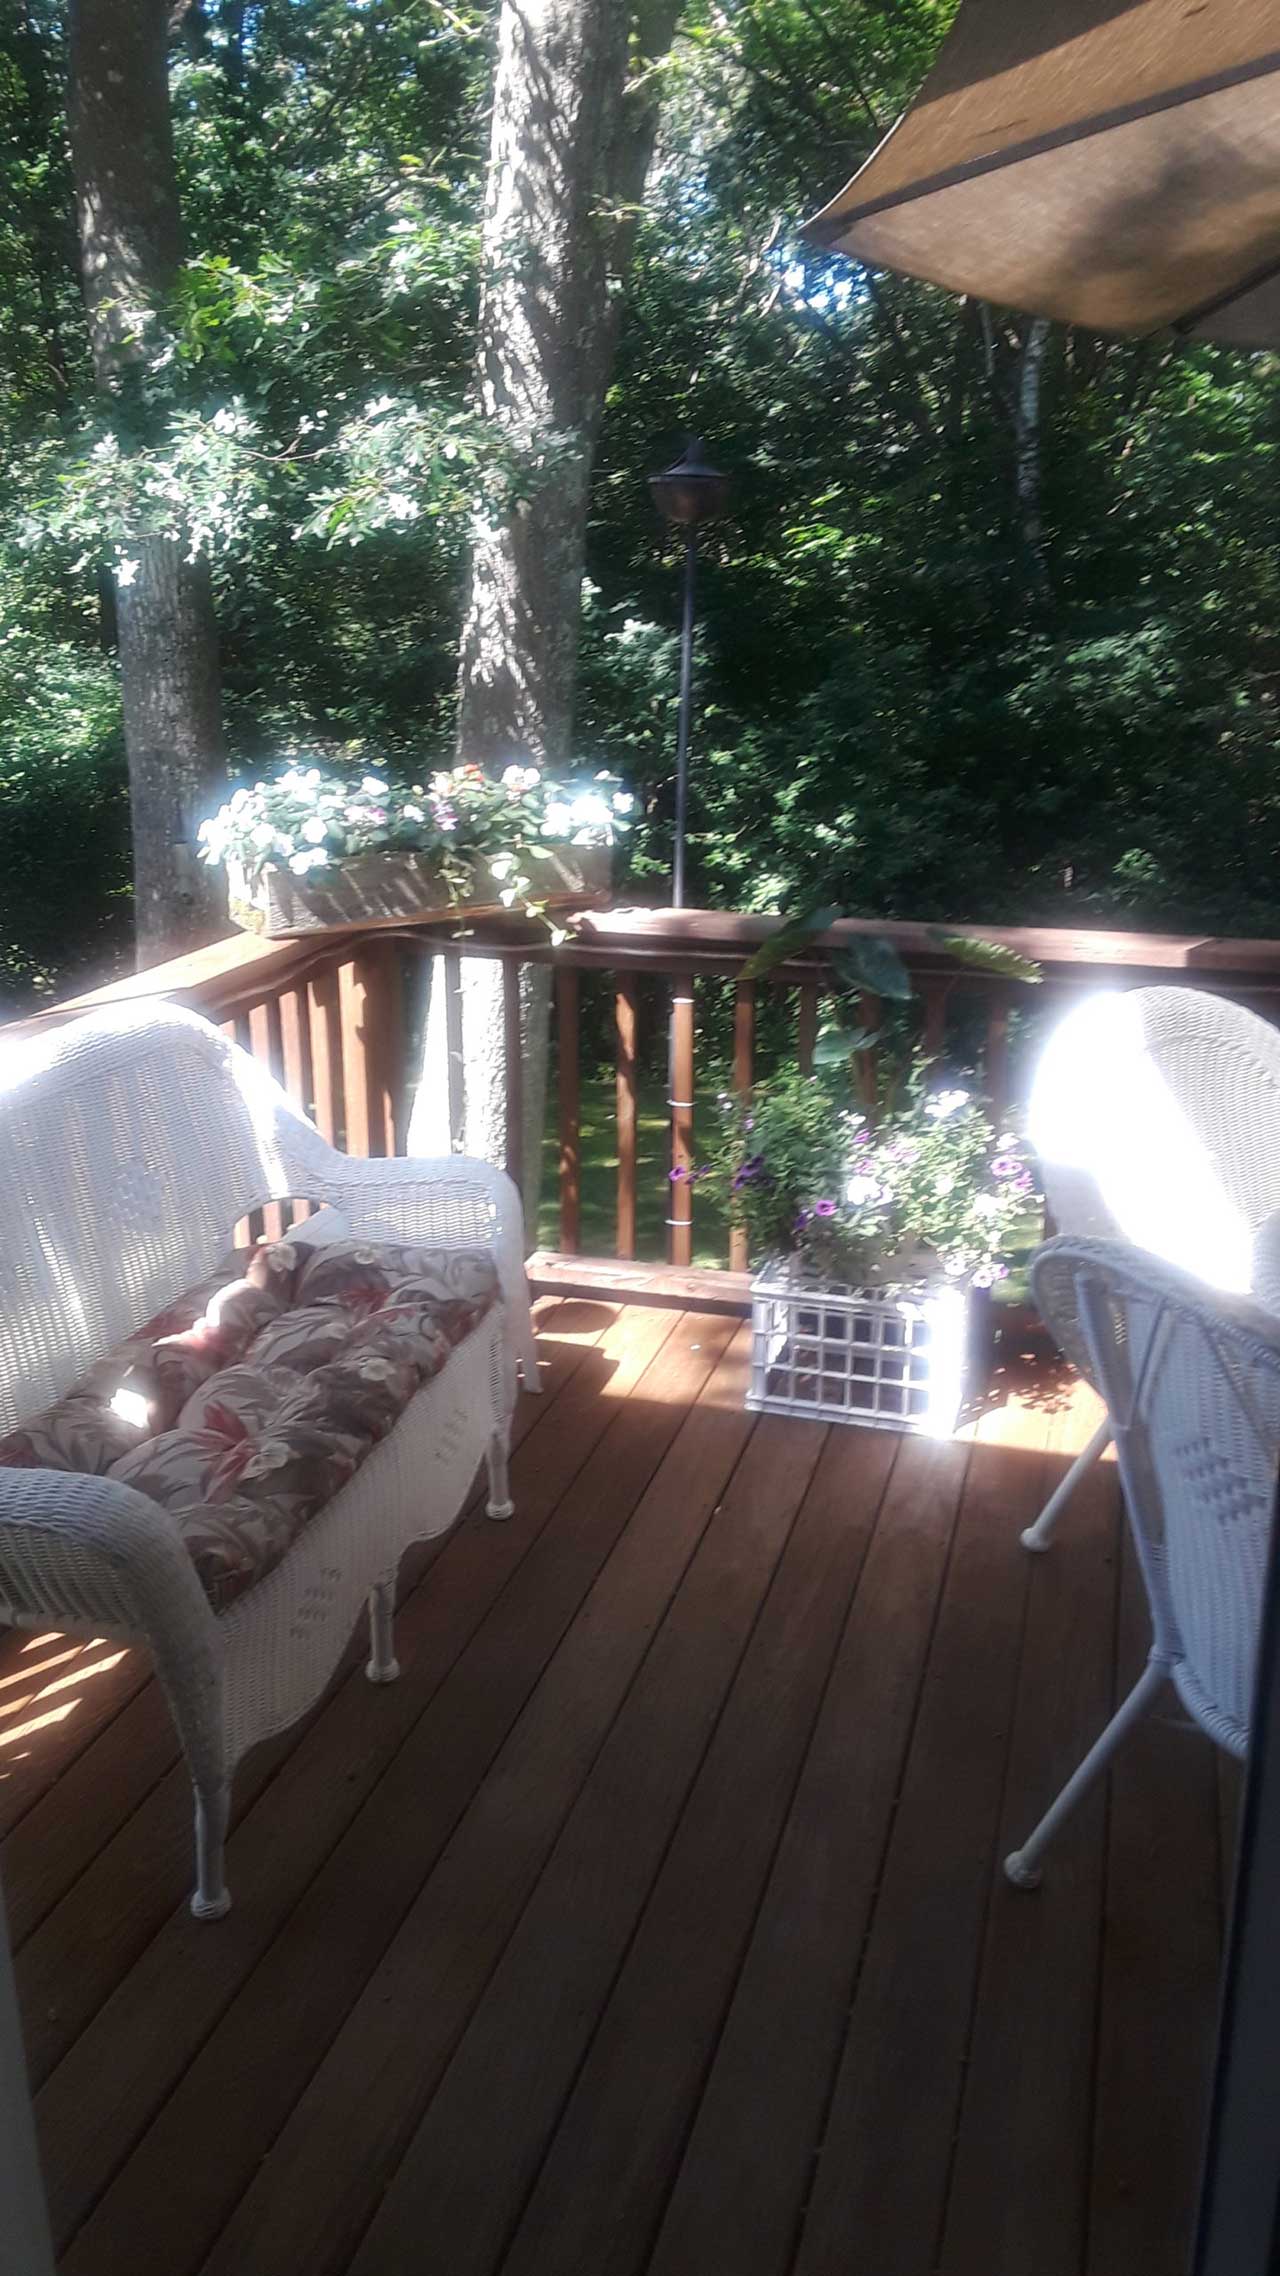 Sunshine and Wooden deck treated with Outlast® CTA Products to preserve and seal wood